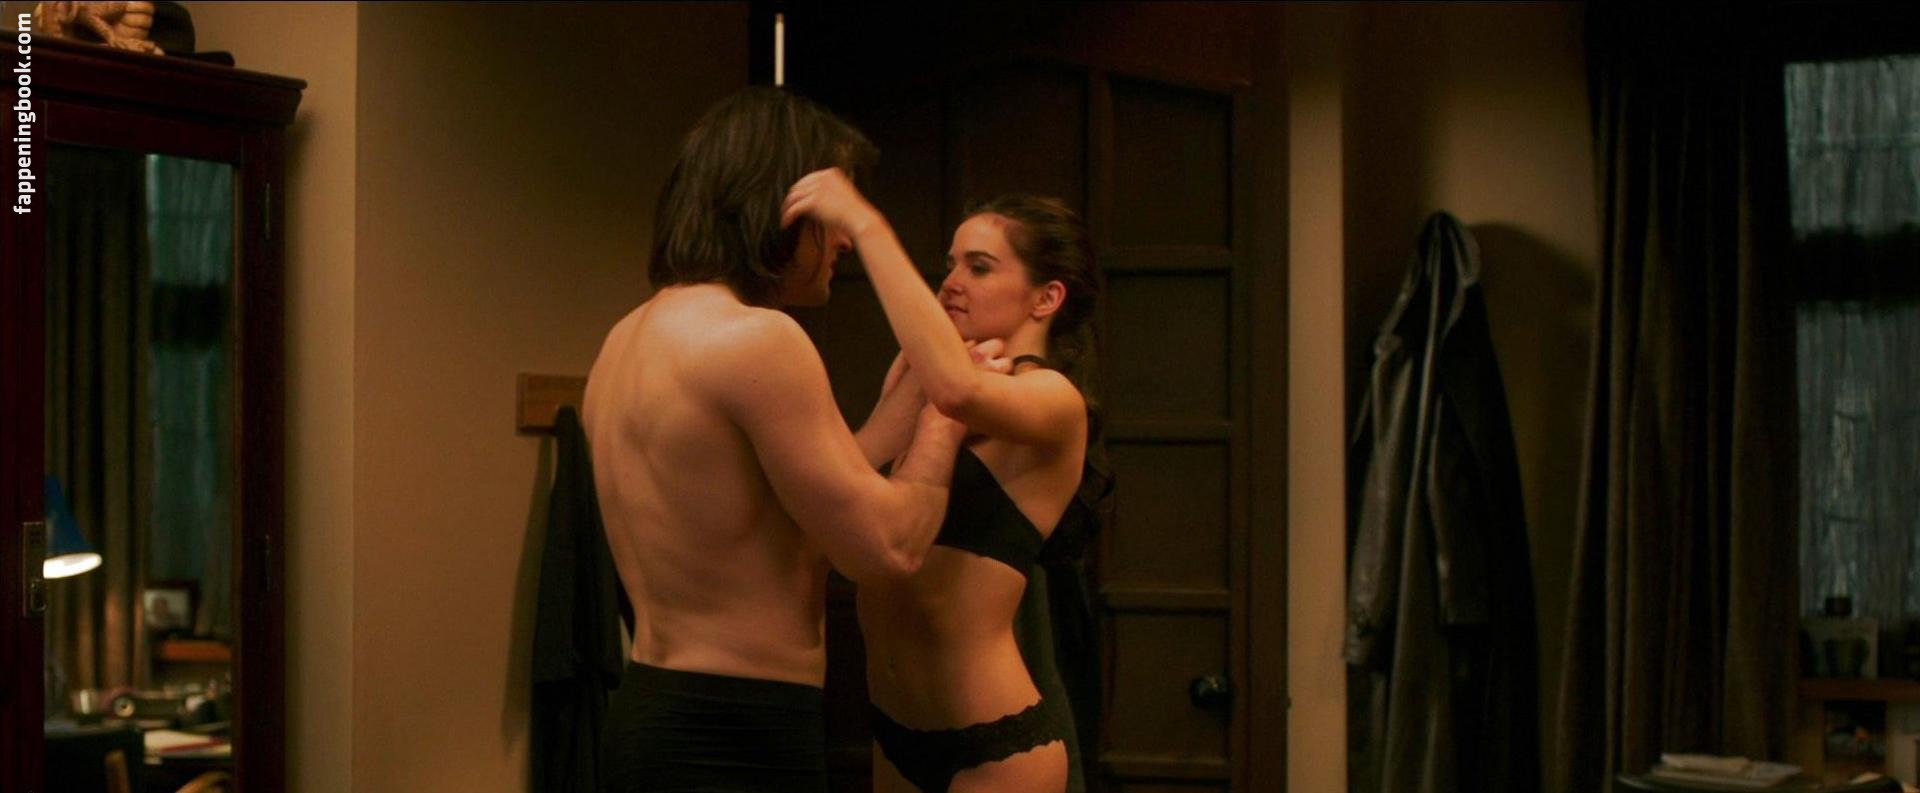 Zoey Deutch Nude, The Fappening - Photo #550308 - FappeningBook.